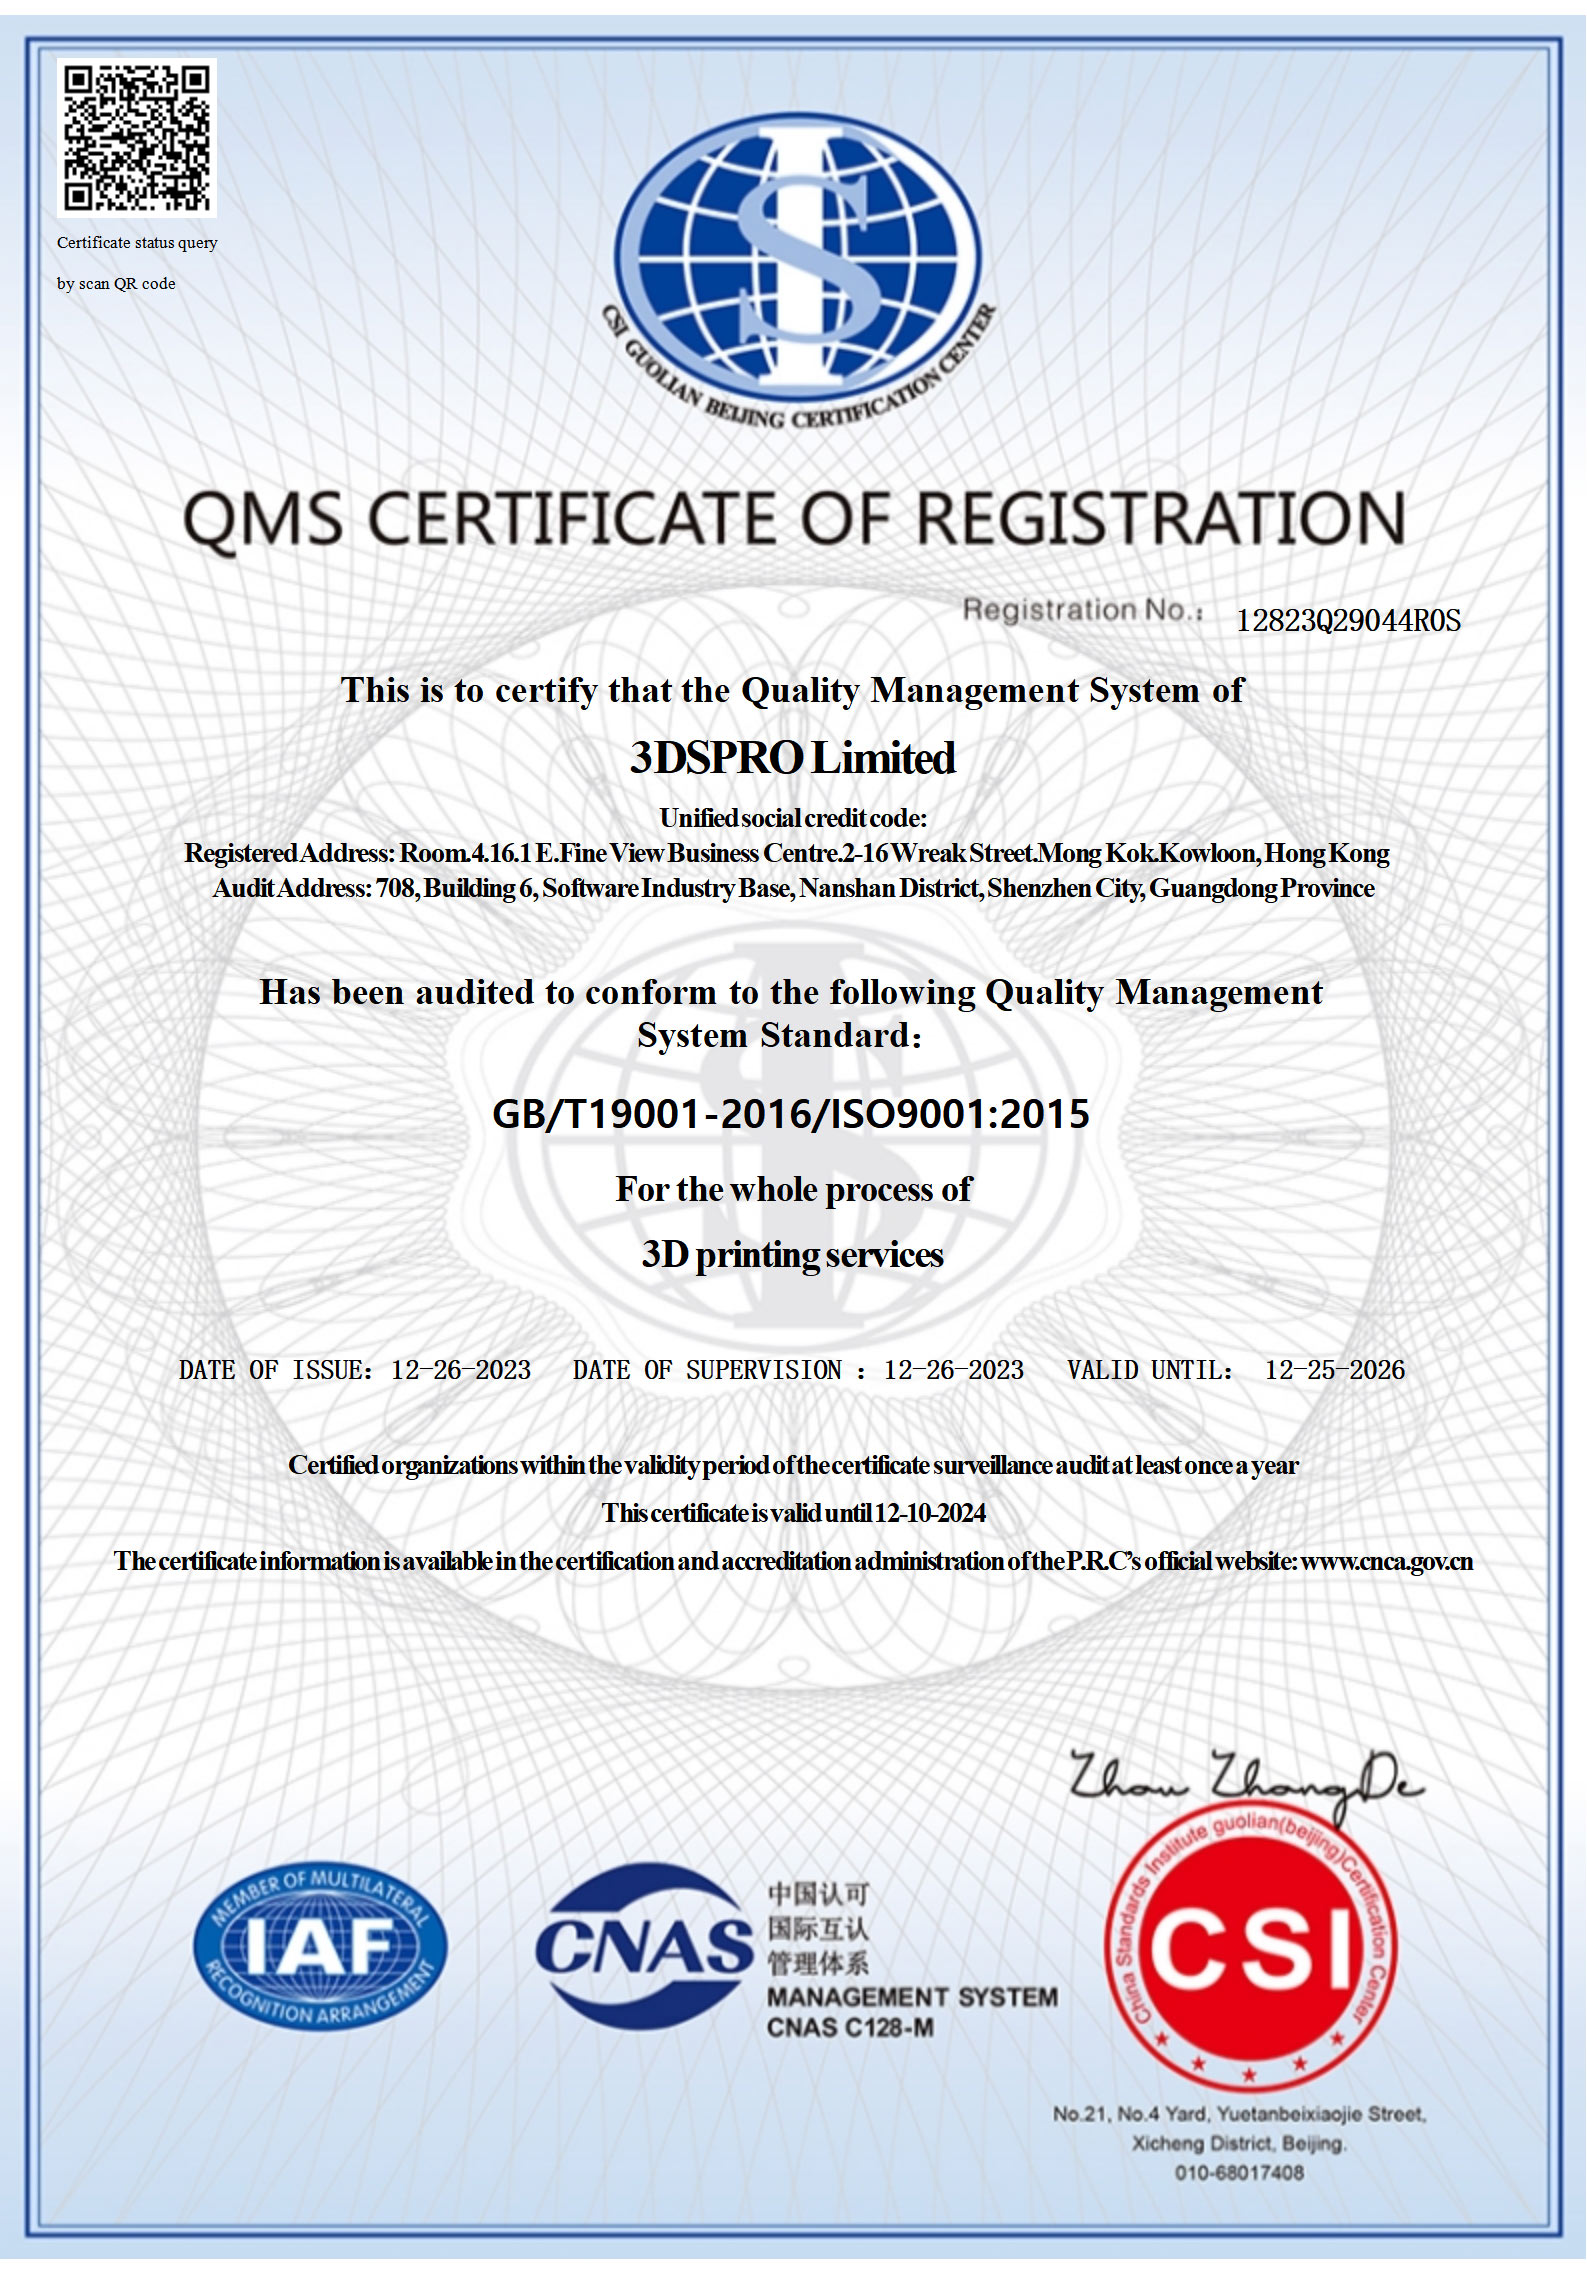 3dspro iso 9001 certificate